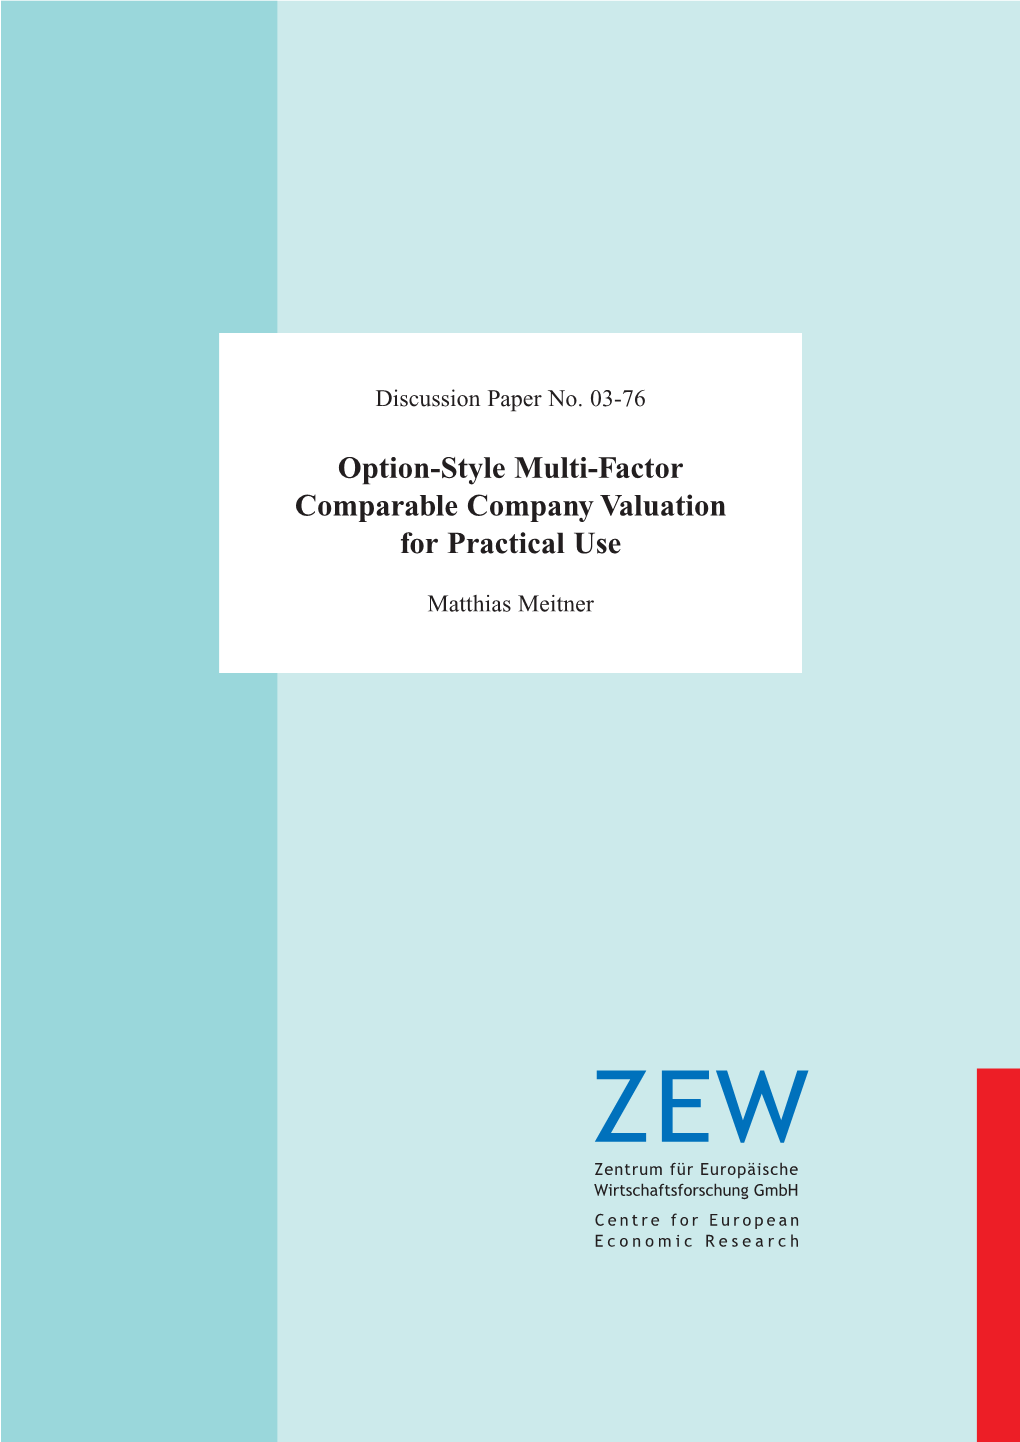 Option-Style Multi-Factor Comparable Company Valuation for Practical Use